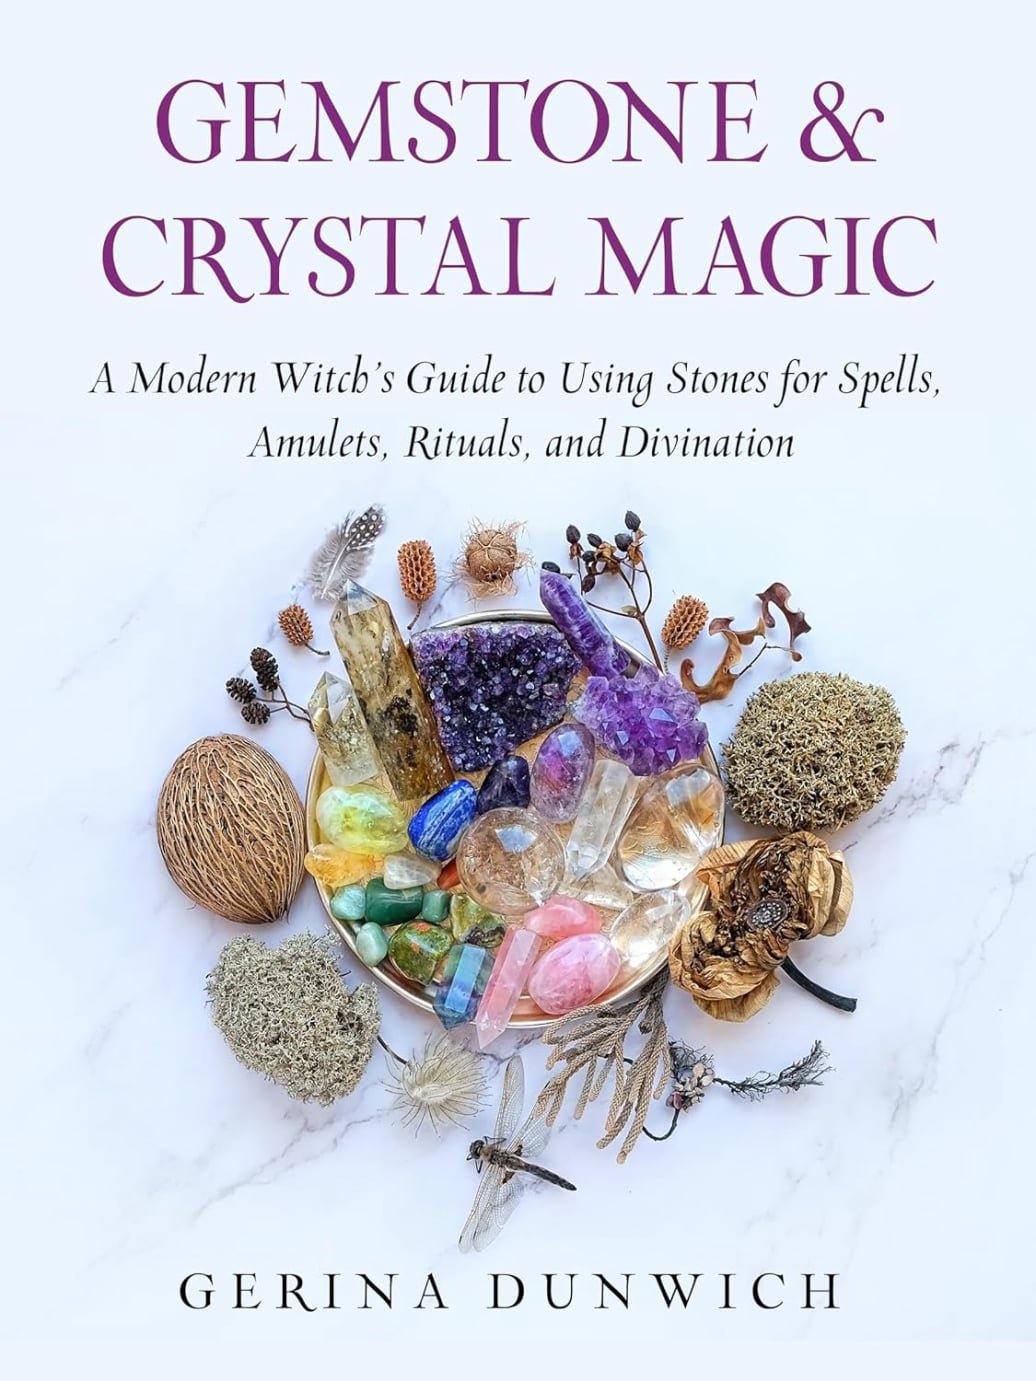 A Modern Witch's Guide to Using Stones for Spells, Amulets, Rituals, and Divination